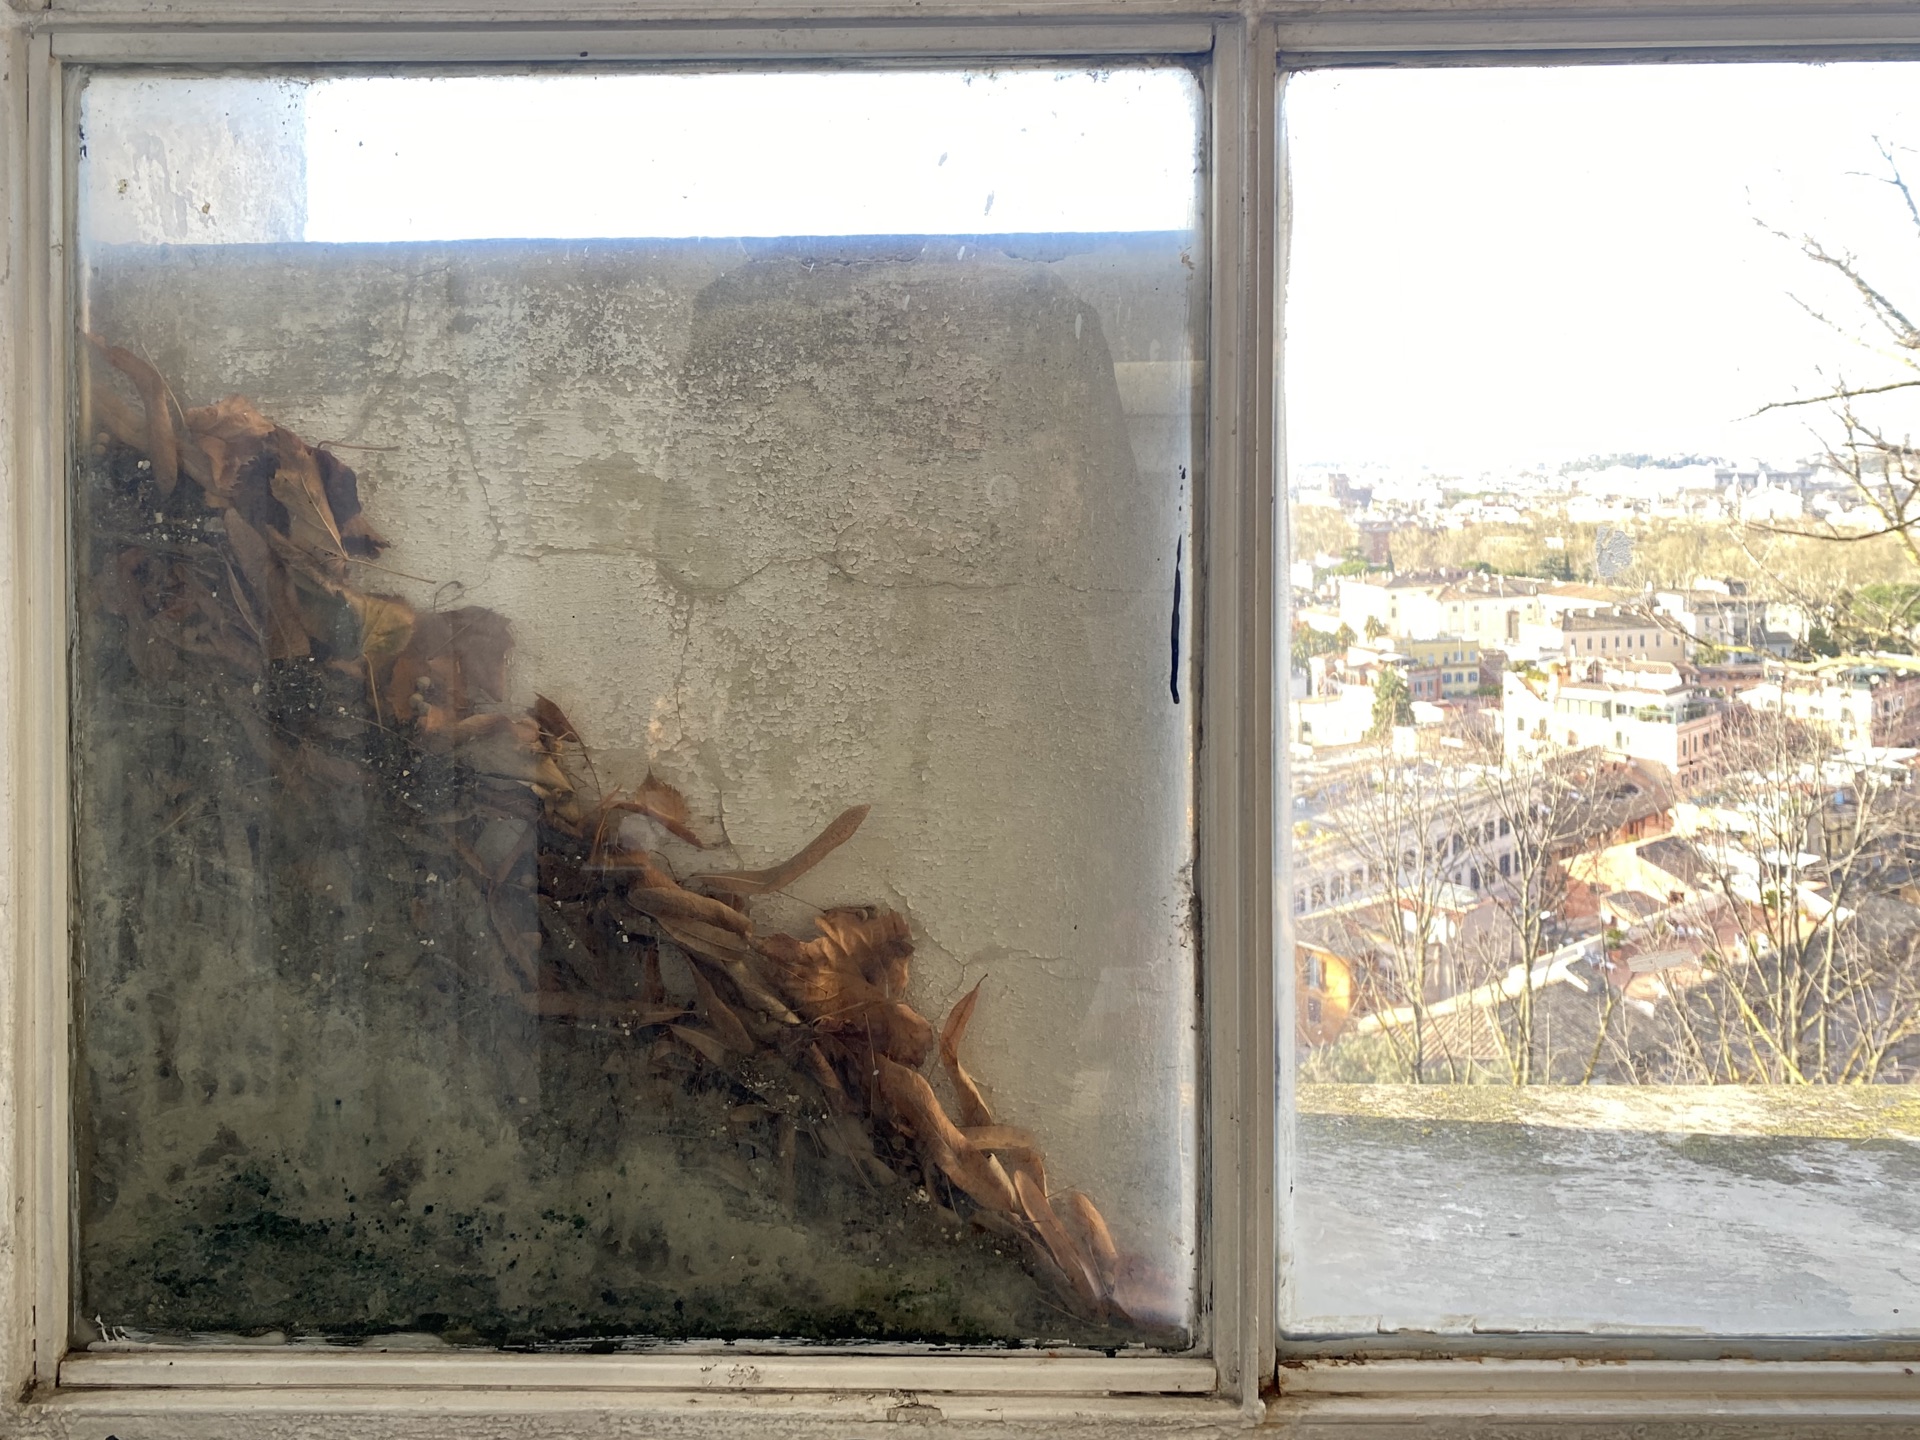 Leaves trapped between the glass of a window and a marble block beyond it